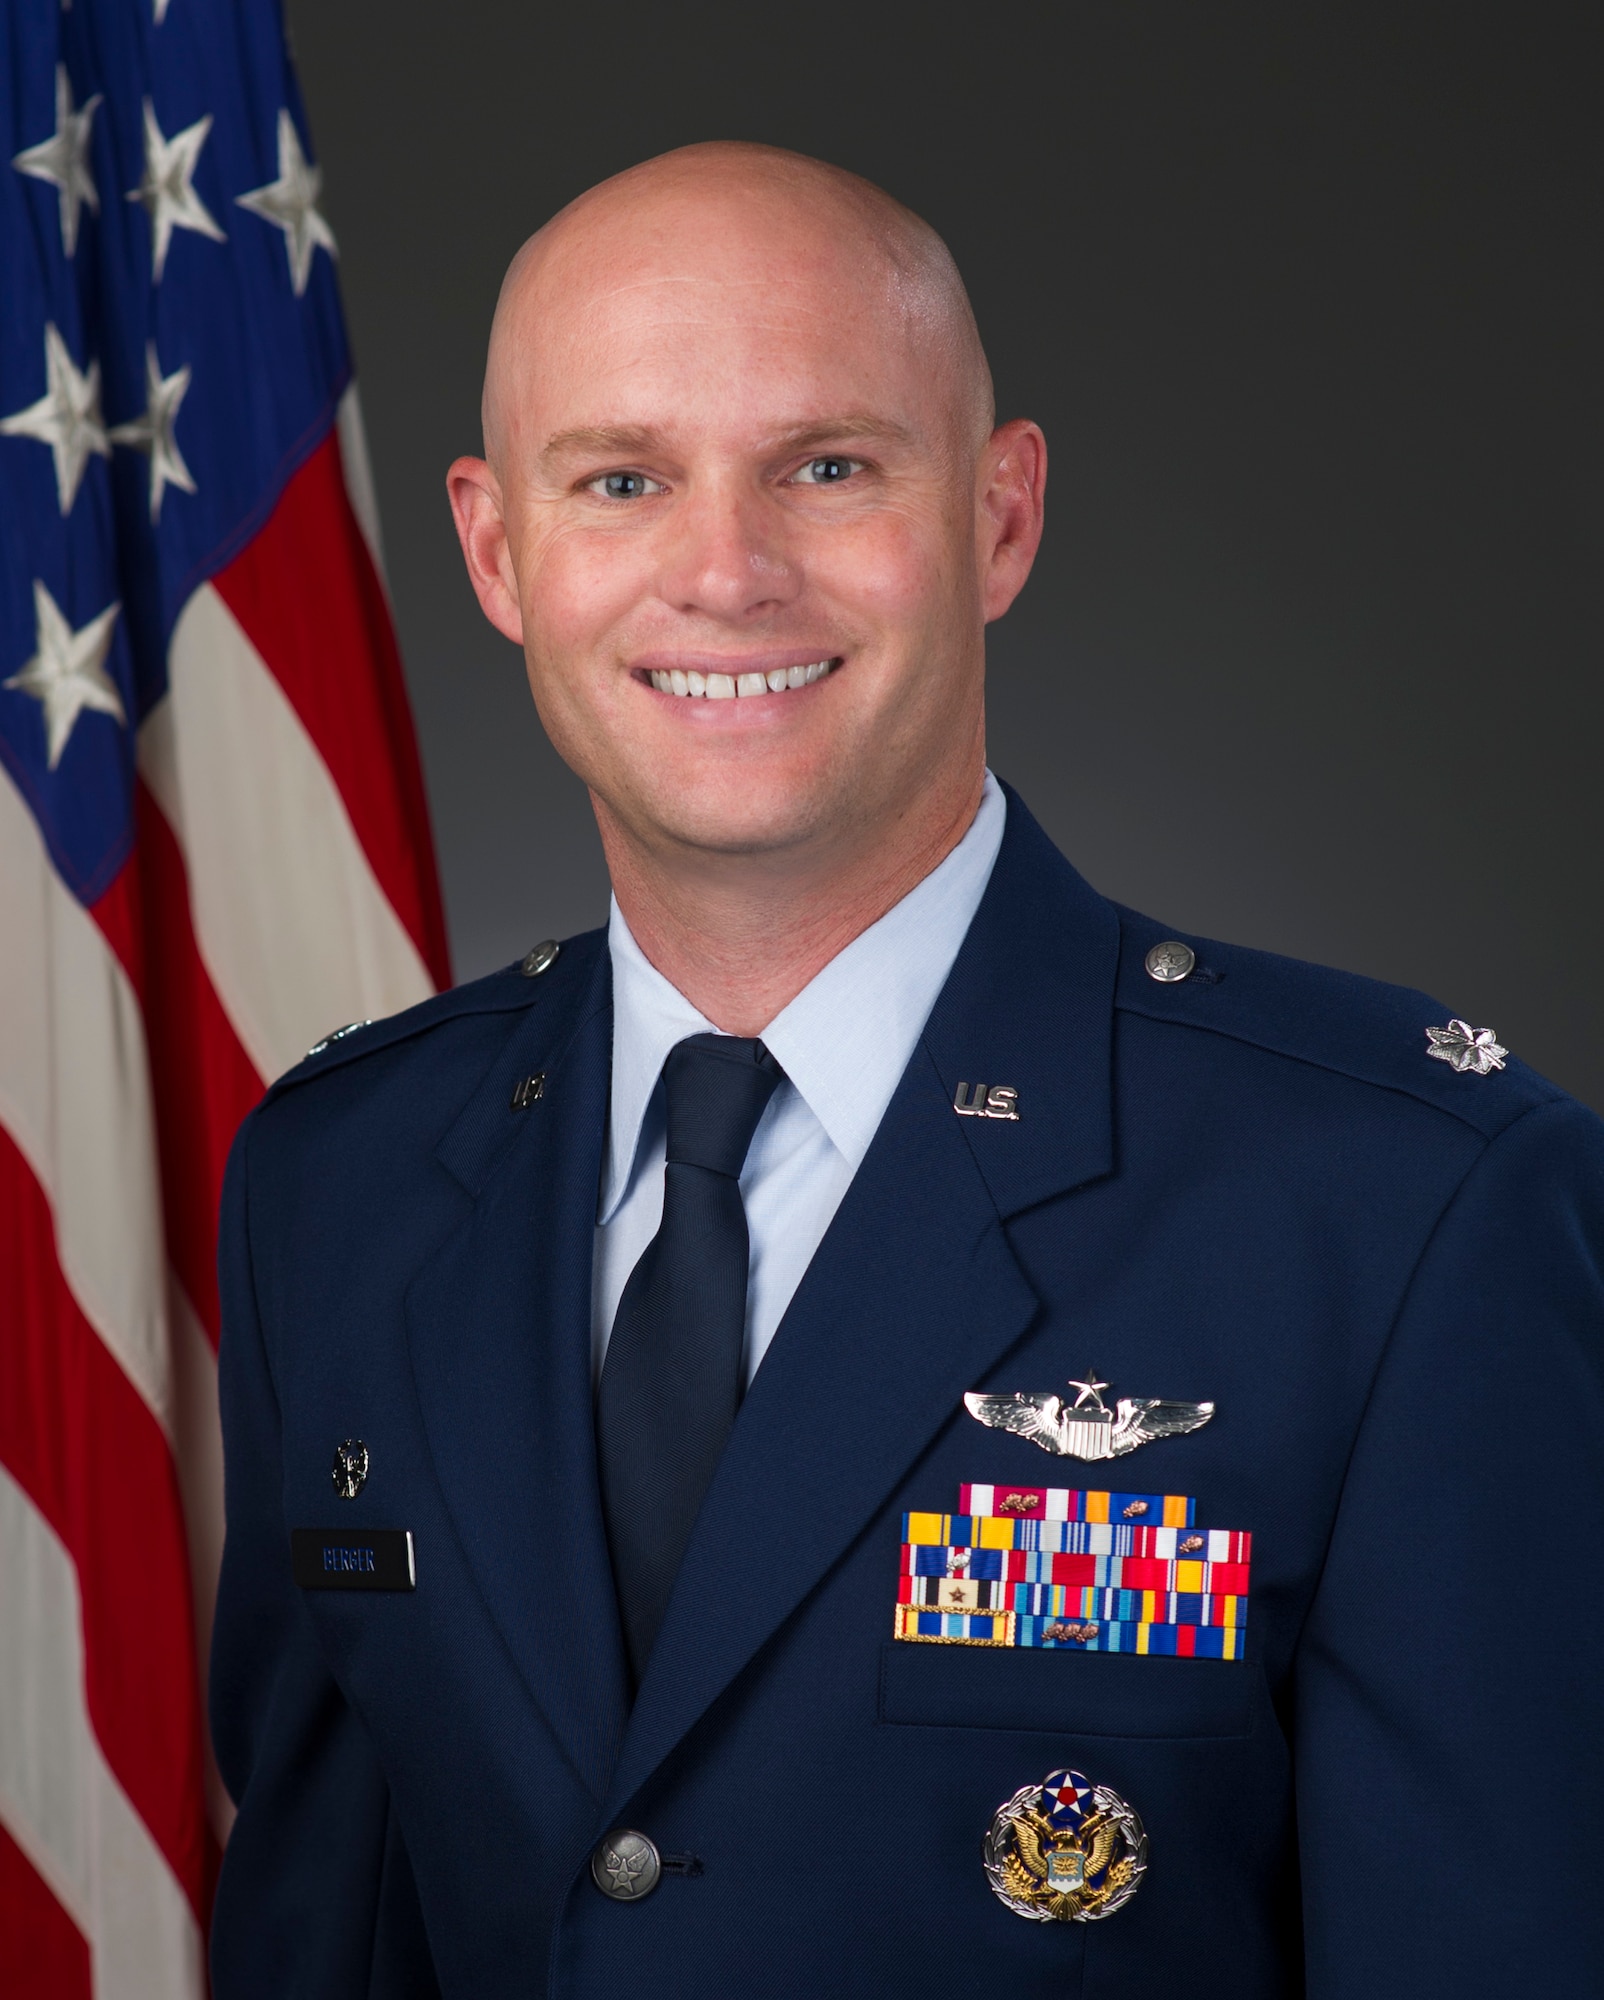 Lt. Col. John Berger, 321 st Air Mobility Operations Squadron commander, shares the power of resiliency and how his own resiliency helped him recover from being hit by a truck. (Courtesy Photo)